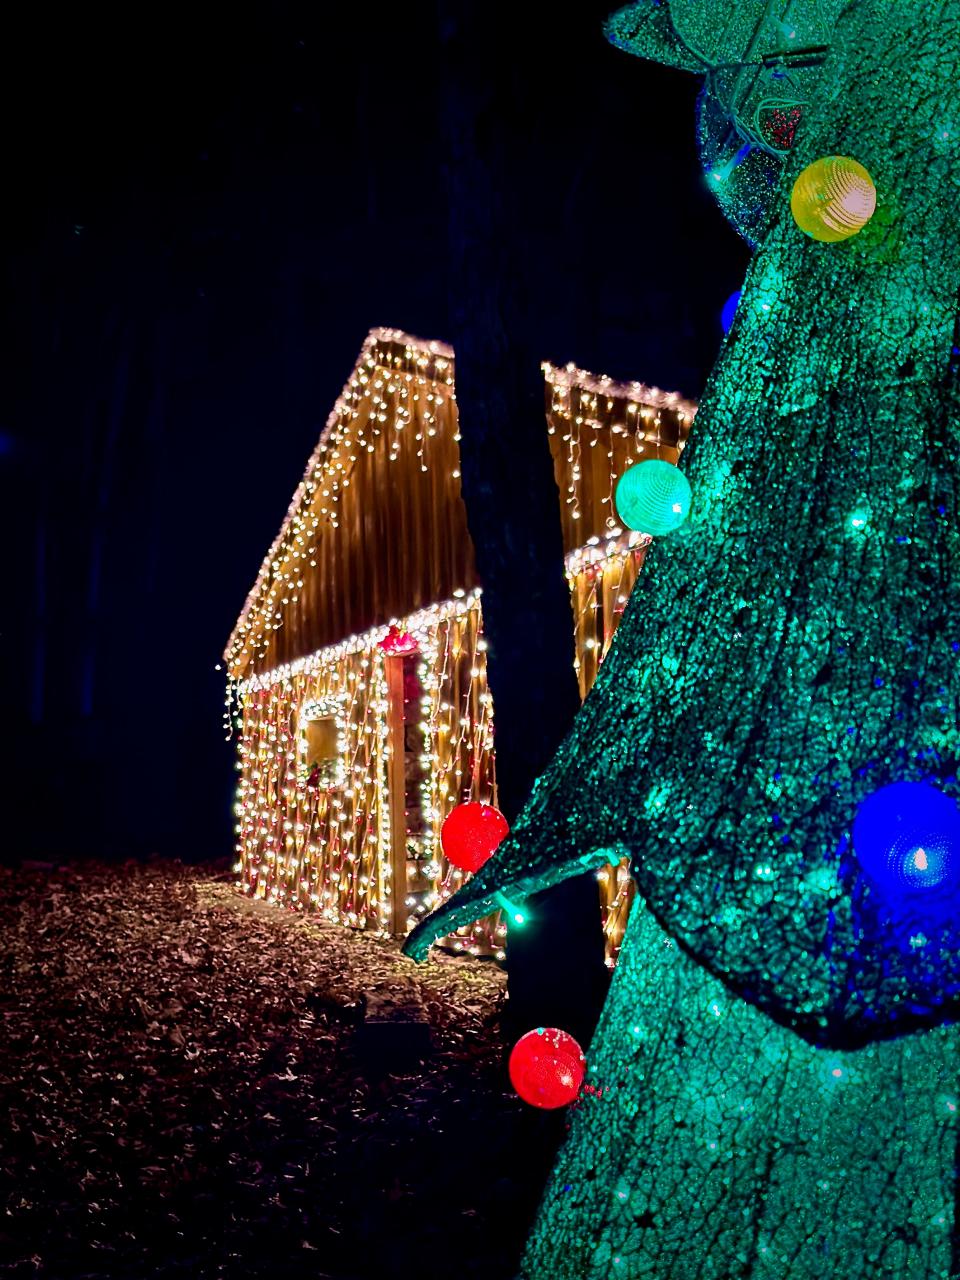 Enchanted Lights is the new holiday lights attraction in New Sewickley Township.